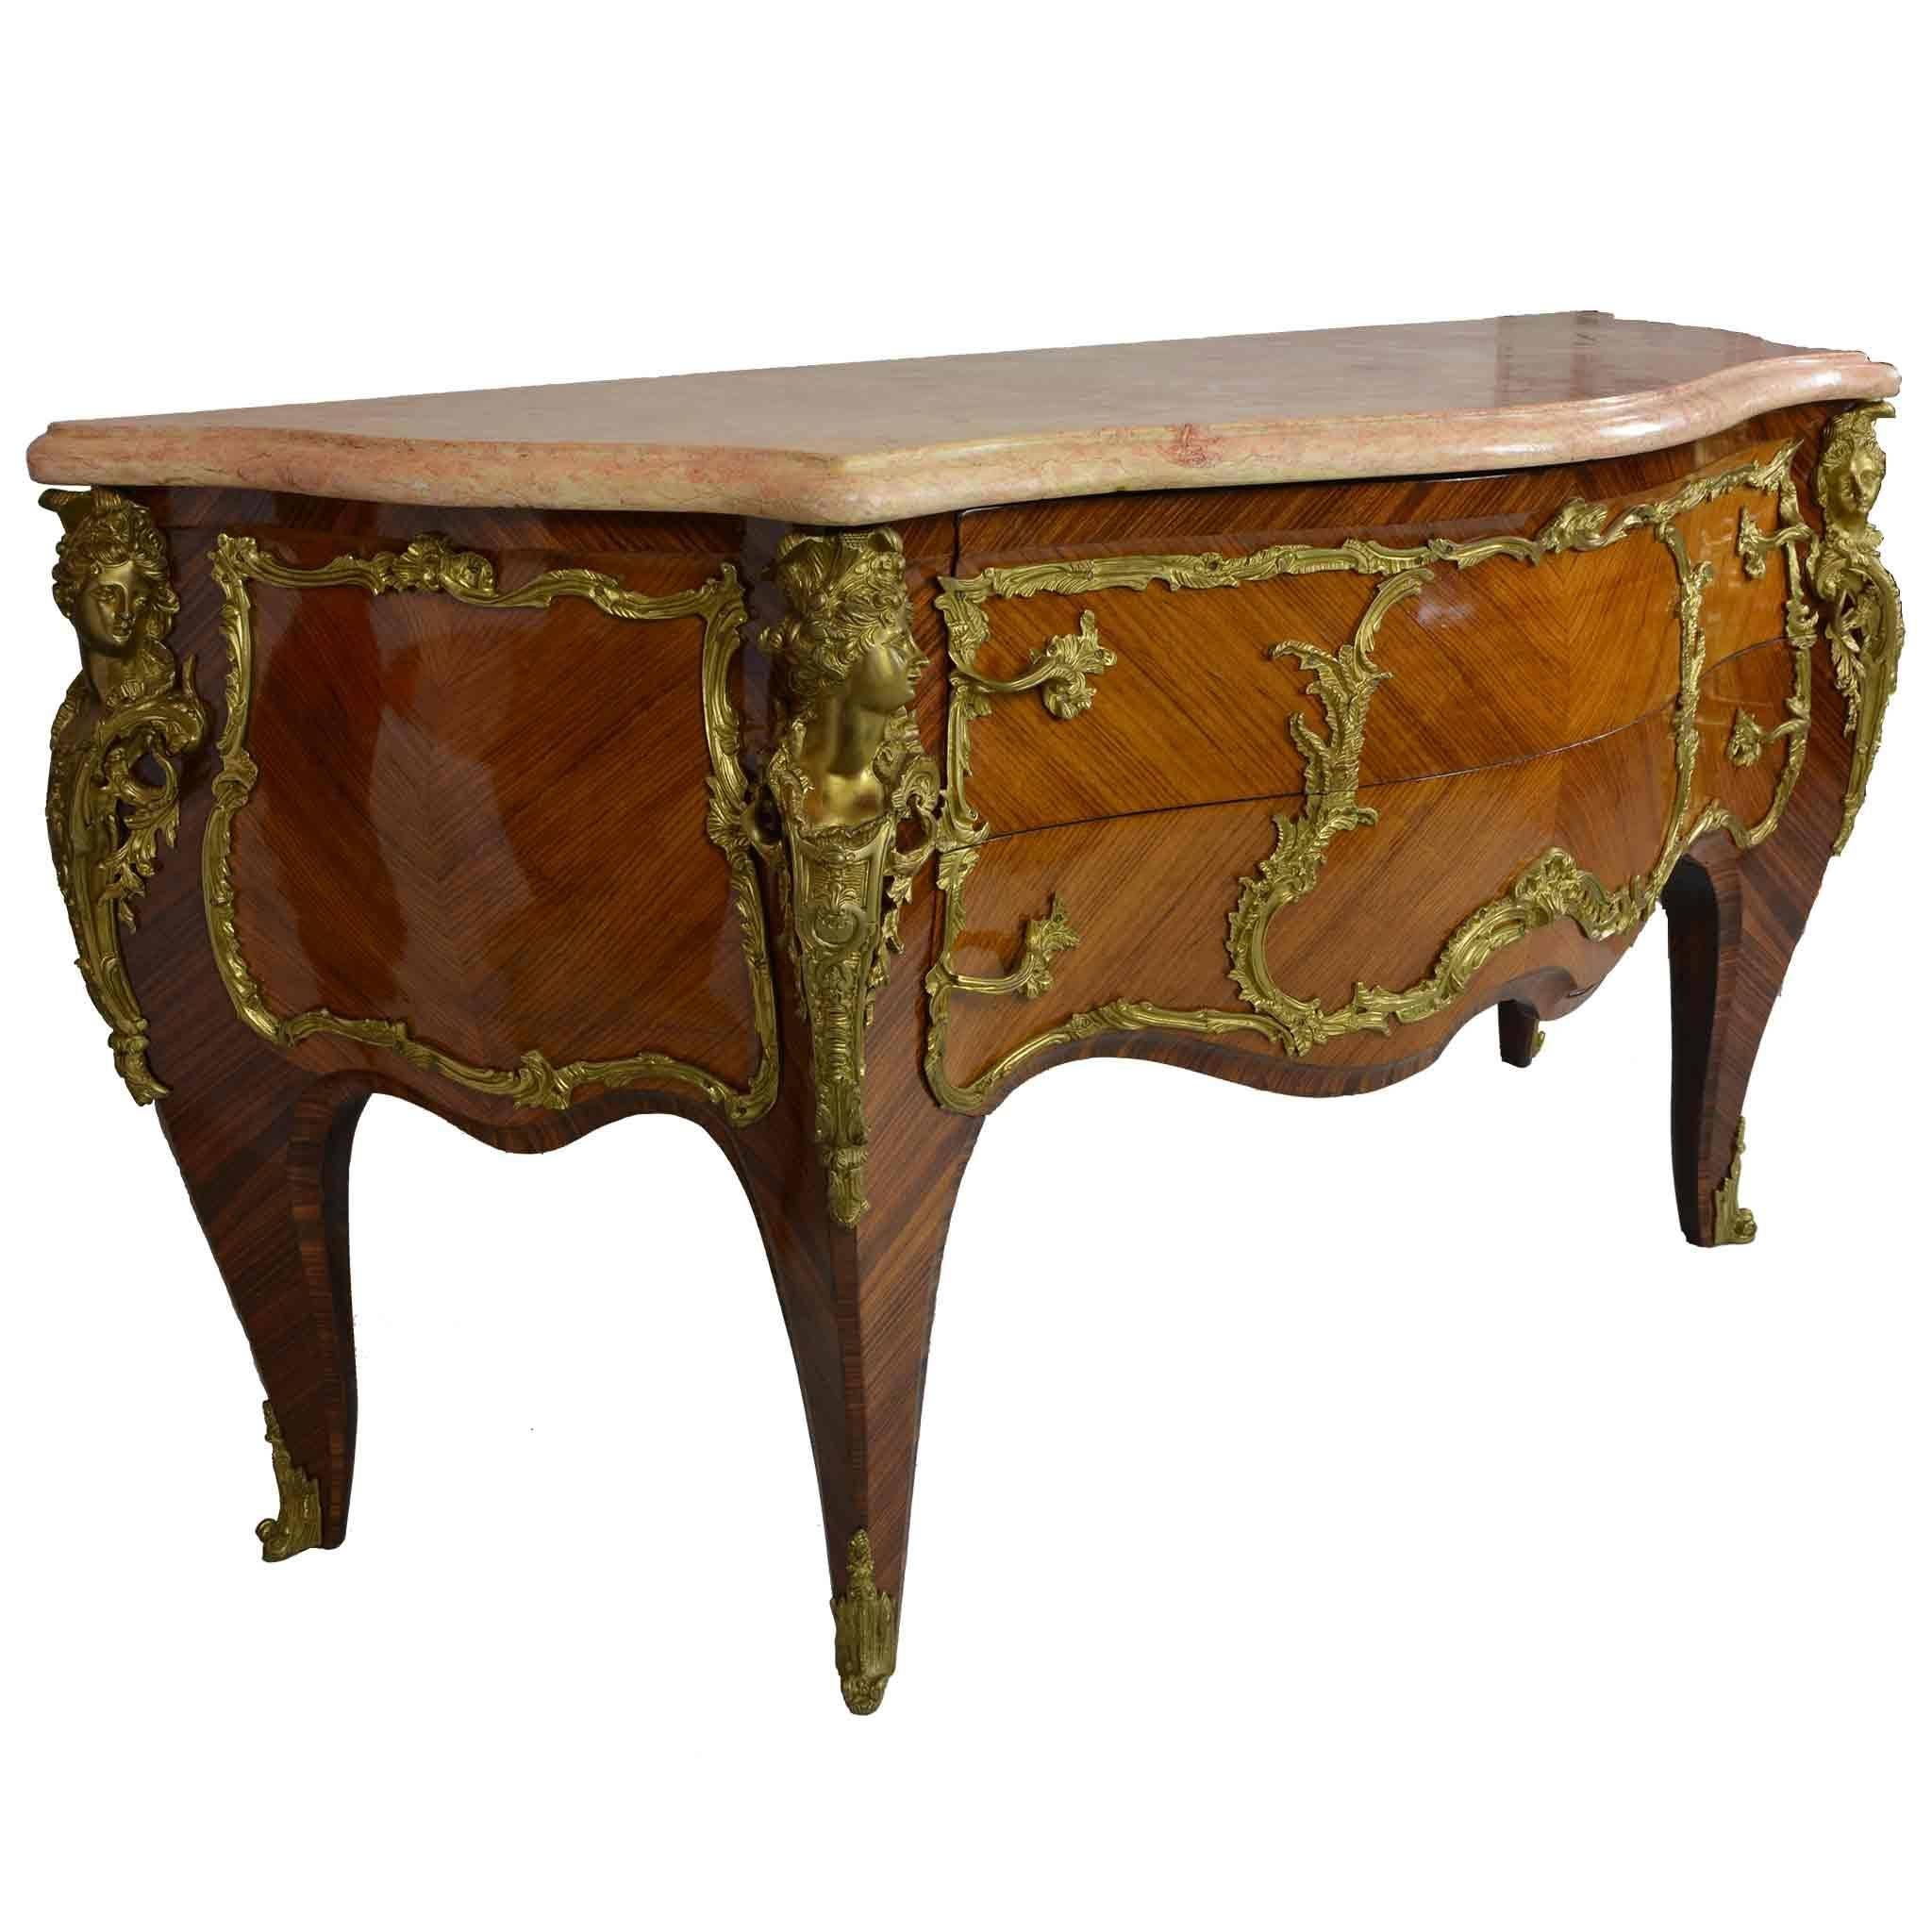 An absolutely stunning period piece, this majestic French commode features a luscious beveled rose marble top, strongly grained wood veneers, and plentiful gilded brass ornamentation. The moment it caught my eye, I knew I couldn't leave it behind.